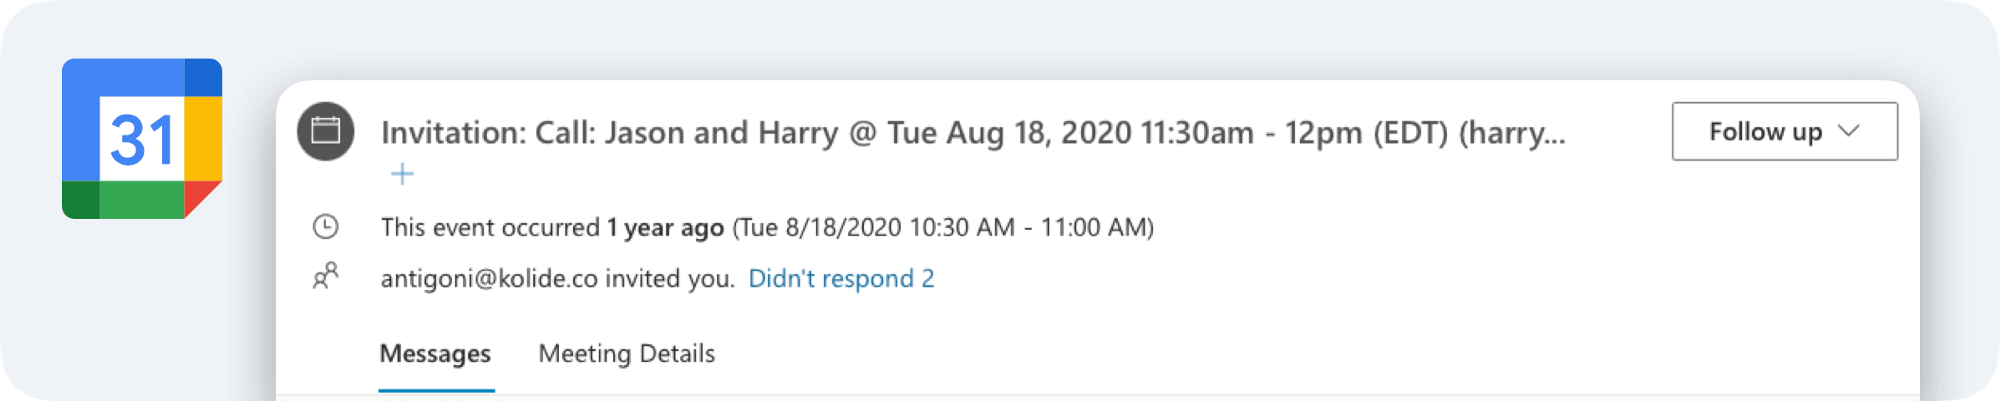 A screenshot of a meeting invite between Jason and Harry scheduled for Tuesday August 18th, 2020 at 11:30am - 12:00pm EDT